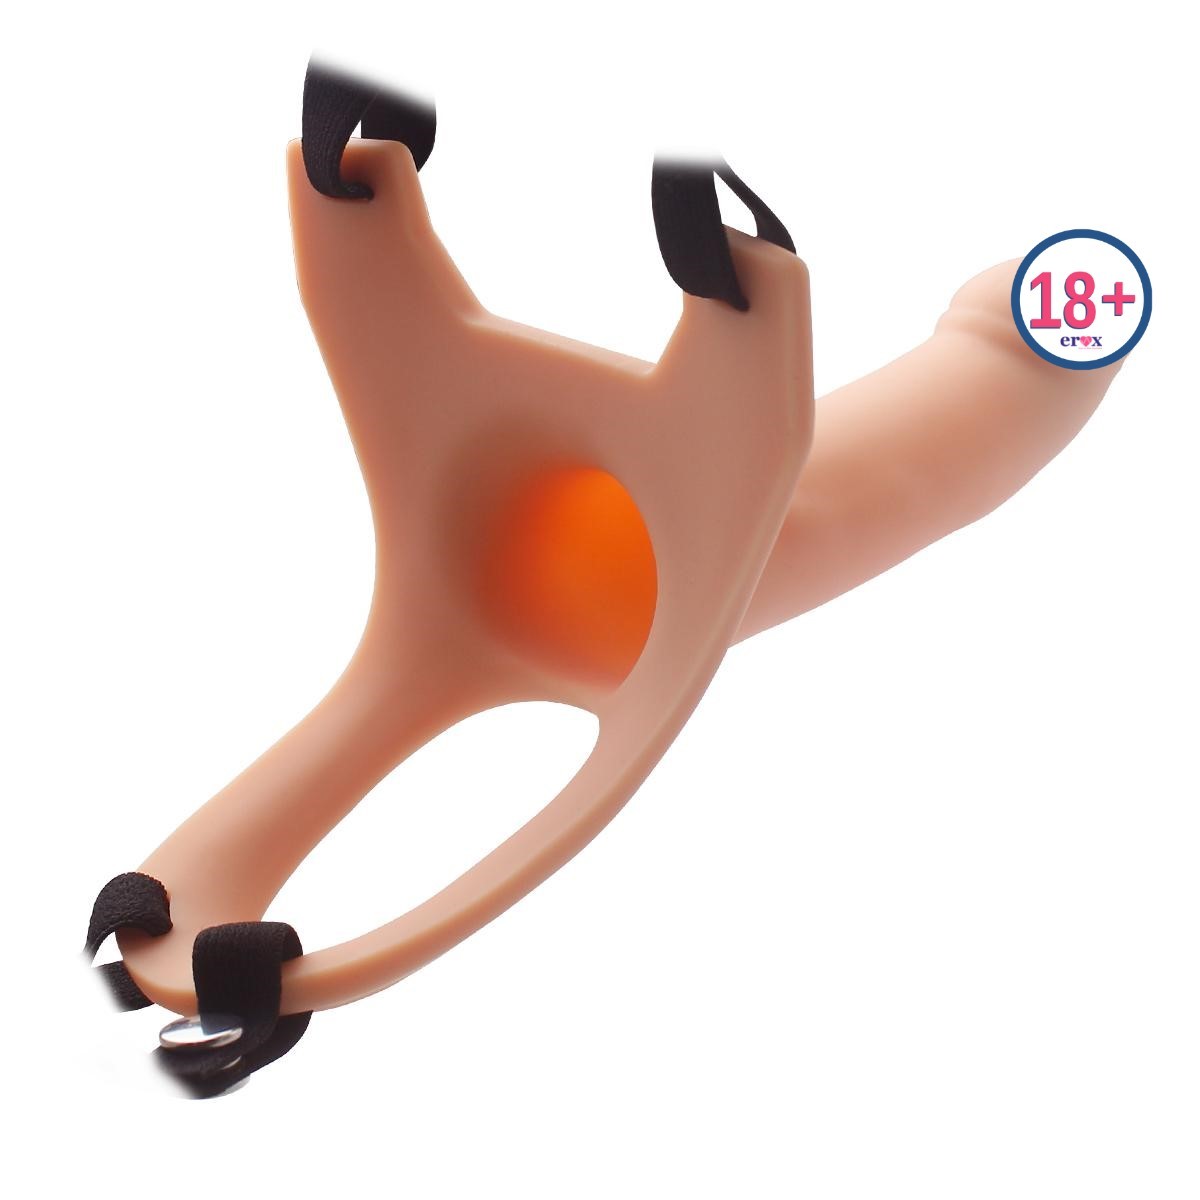 Hollow Strap-On Silicone Curved Dong İçi Boş Kemerli Penis 17 cm